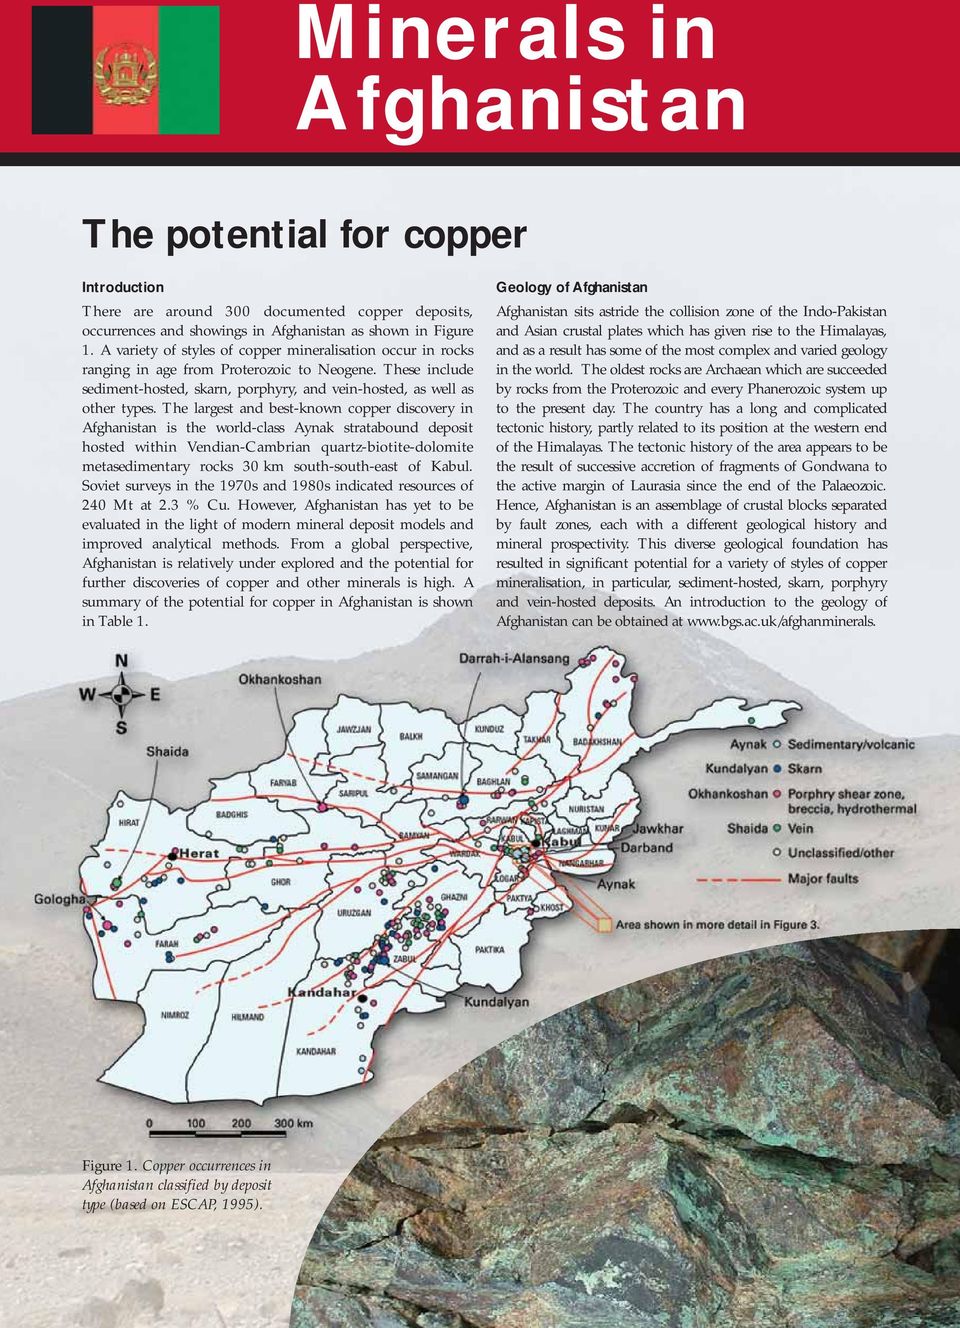 The largest and best-known copper discovery in Afghanistan is the world-class Aynak stratabound deposit hosted within Vendian-Cambrian quartz-biotite-dolomite metasedimentary rocks 30 km